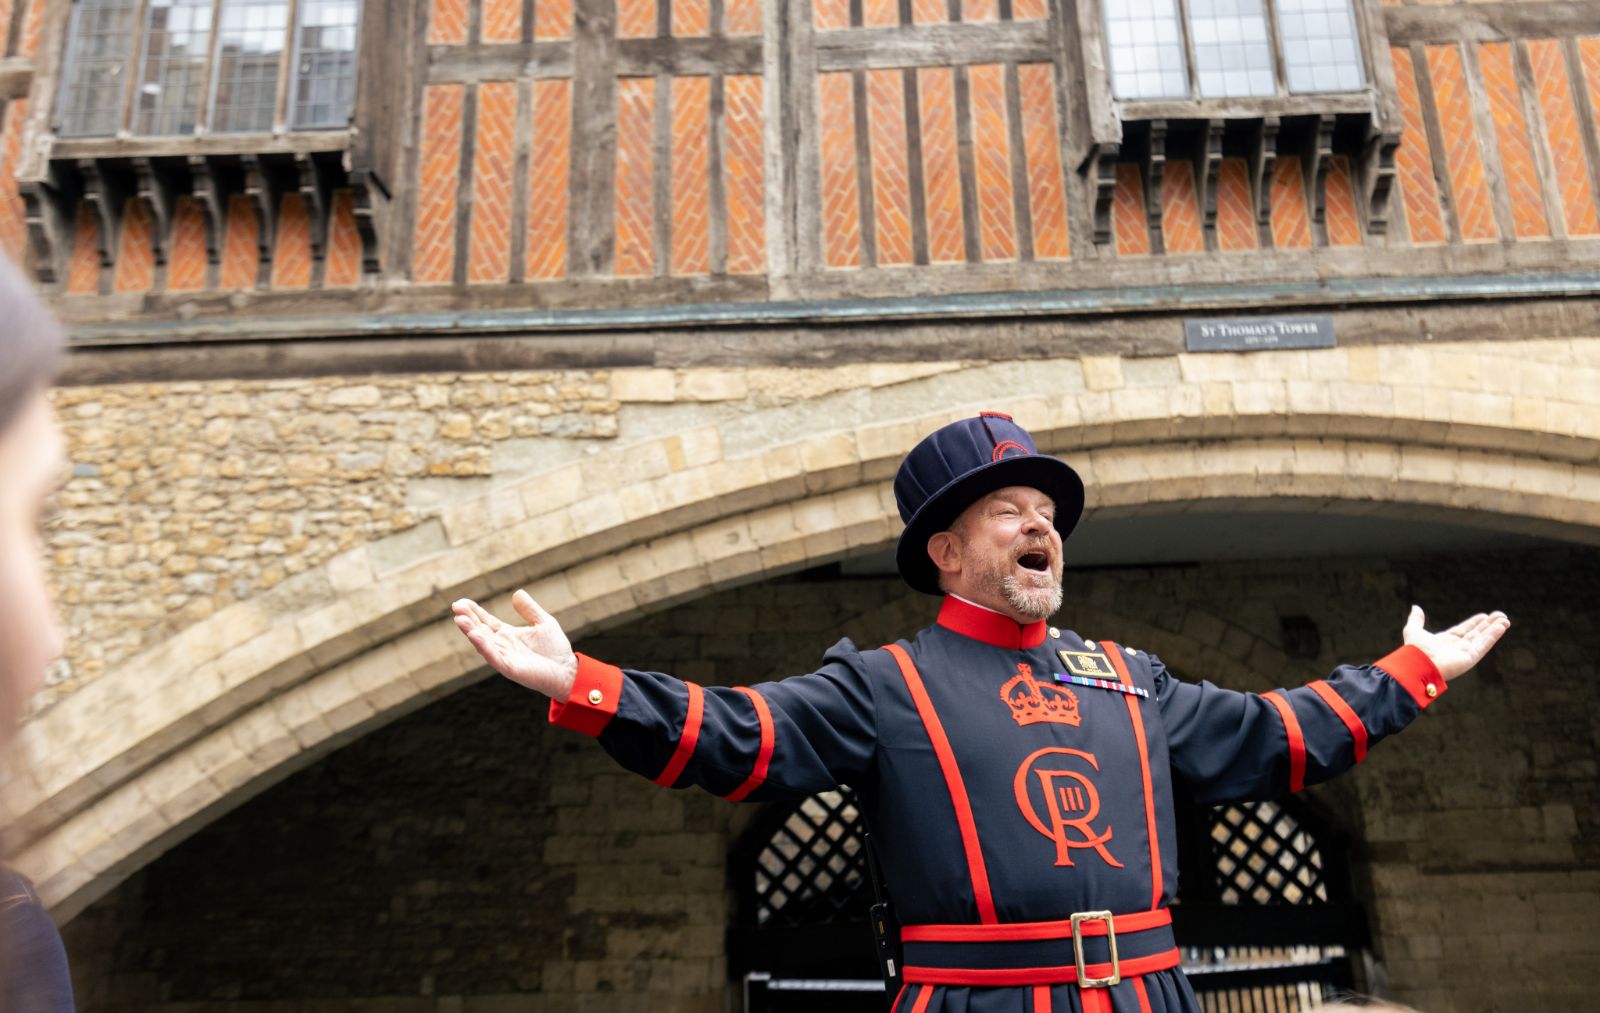 A beefeater outside the Tower of London